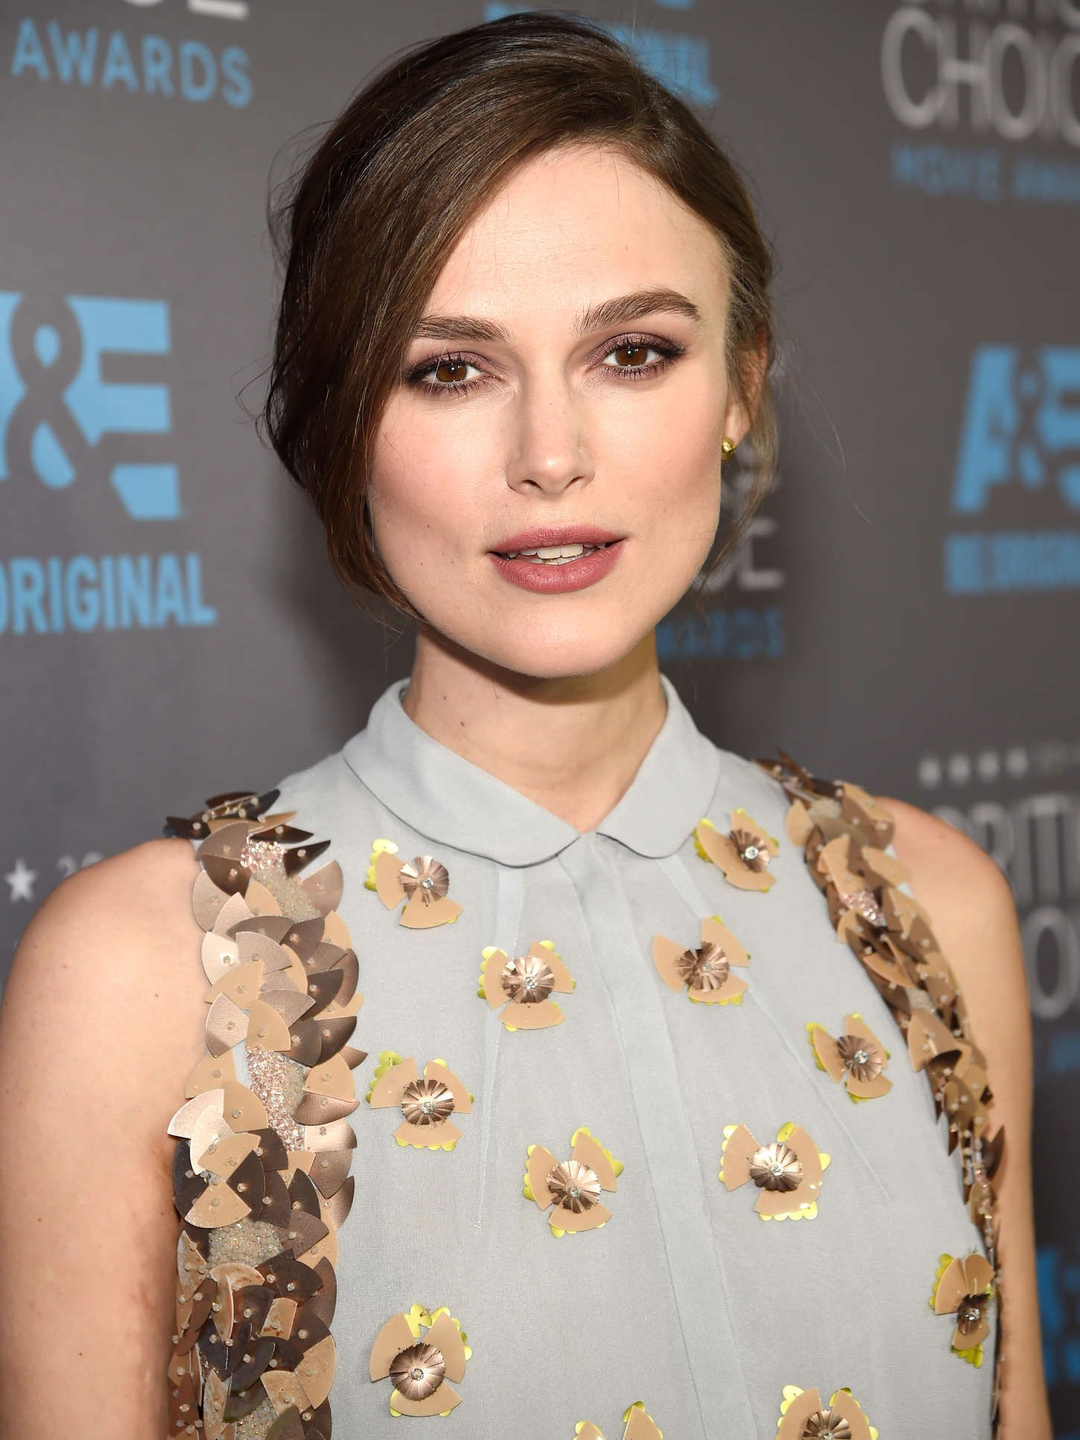 Keira Knightley unphotoshopped pictures